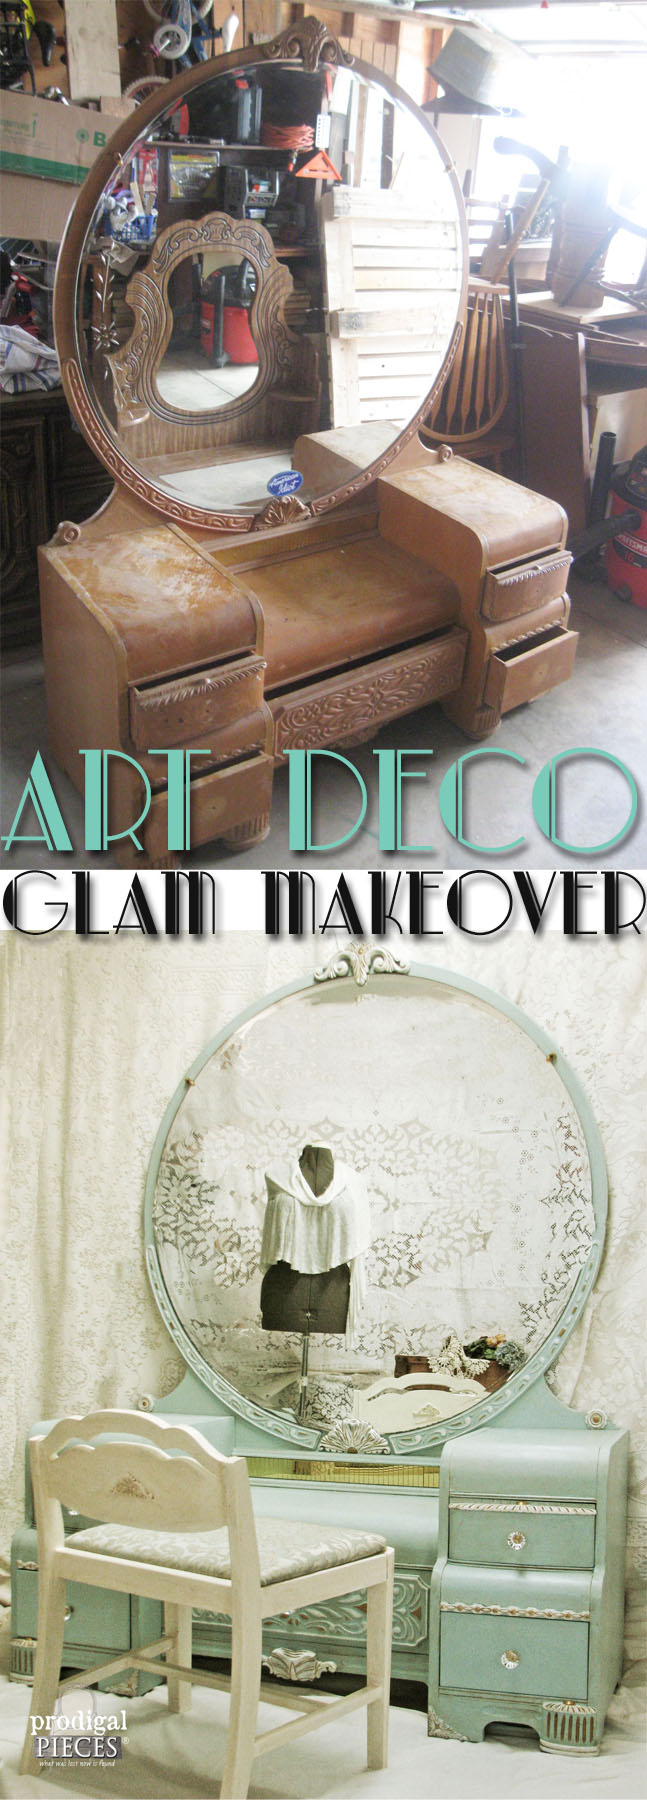 Art Deco Glam Makeover by Prodigal Pieces | prodigalpieces.com #prodigalpieces Antique Rocking Chair